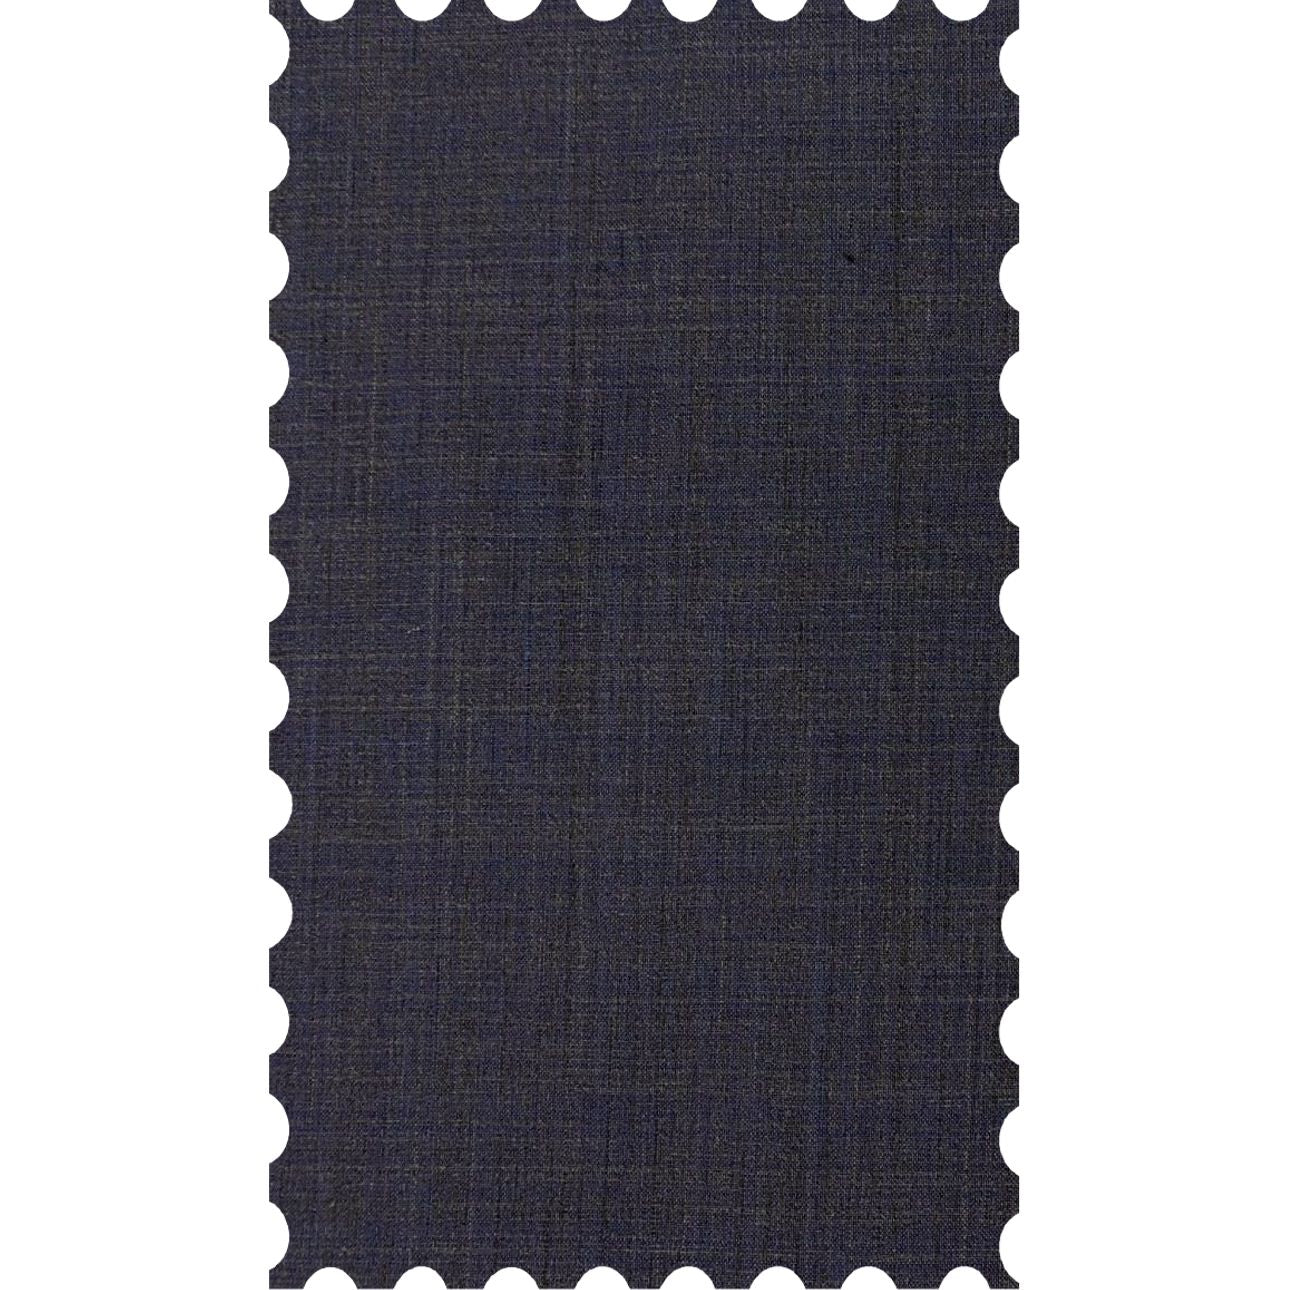 Bennett Double Pleated Super 120s Wool Fancy Trouser in Navy & Brown Crosshatch (Full Fit) - LIMITED EDITION by Zanella